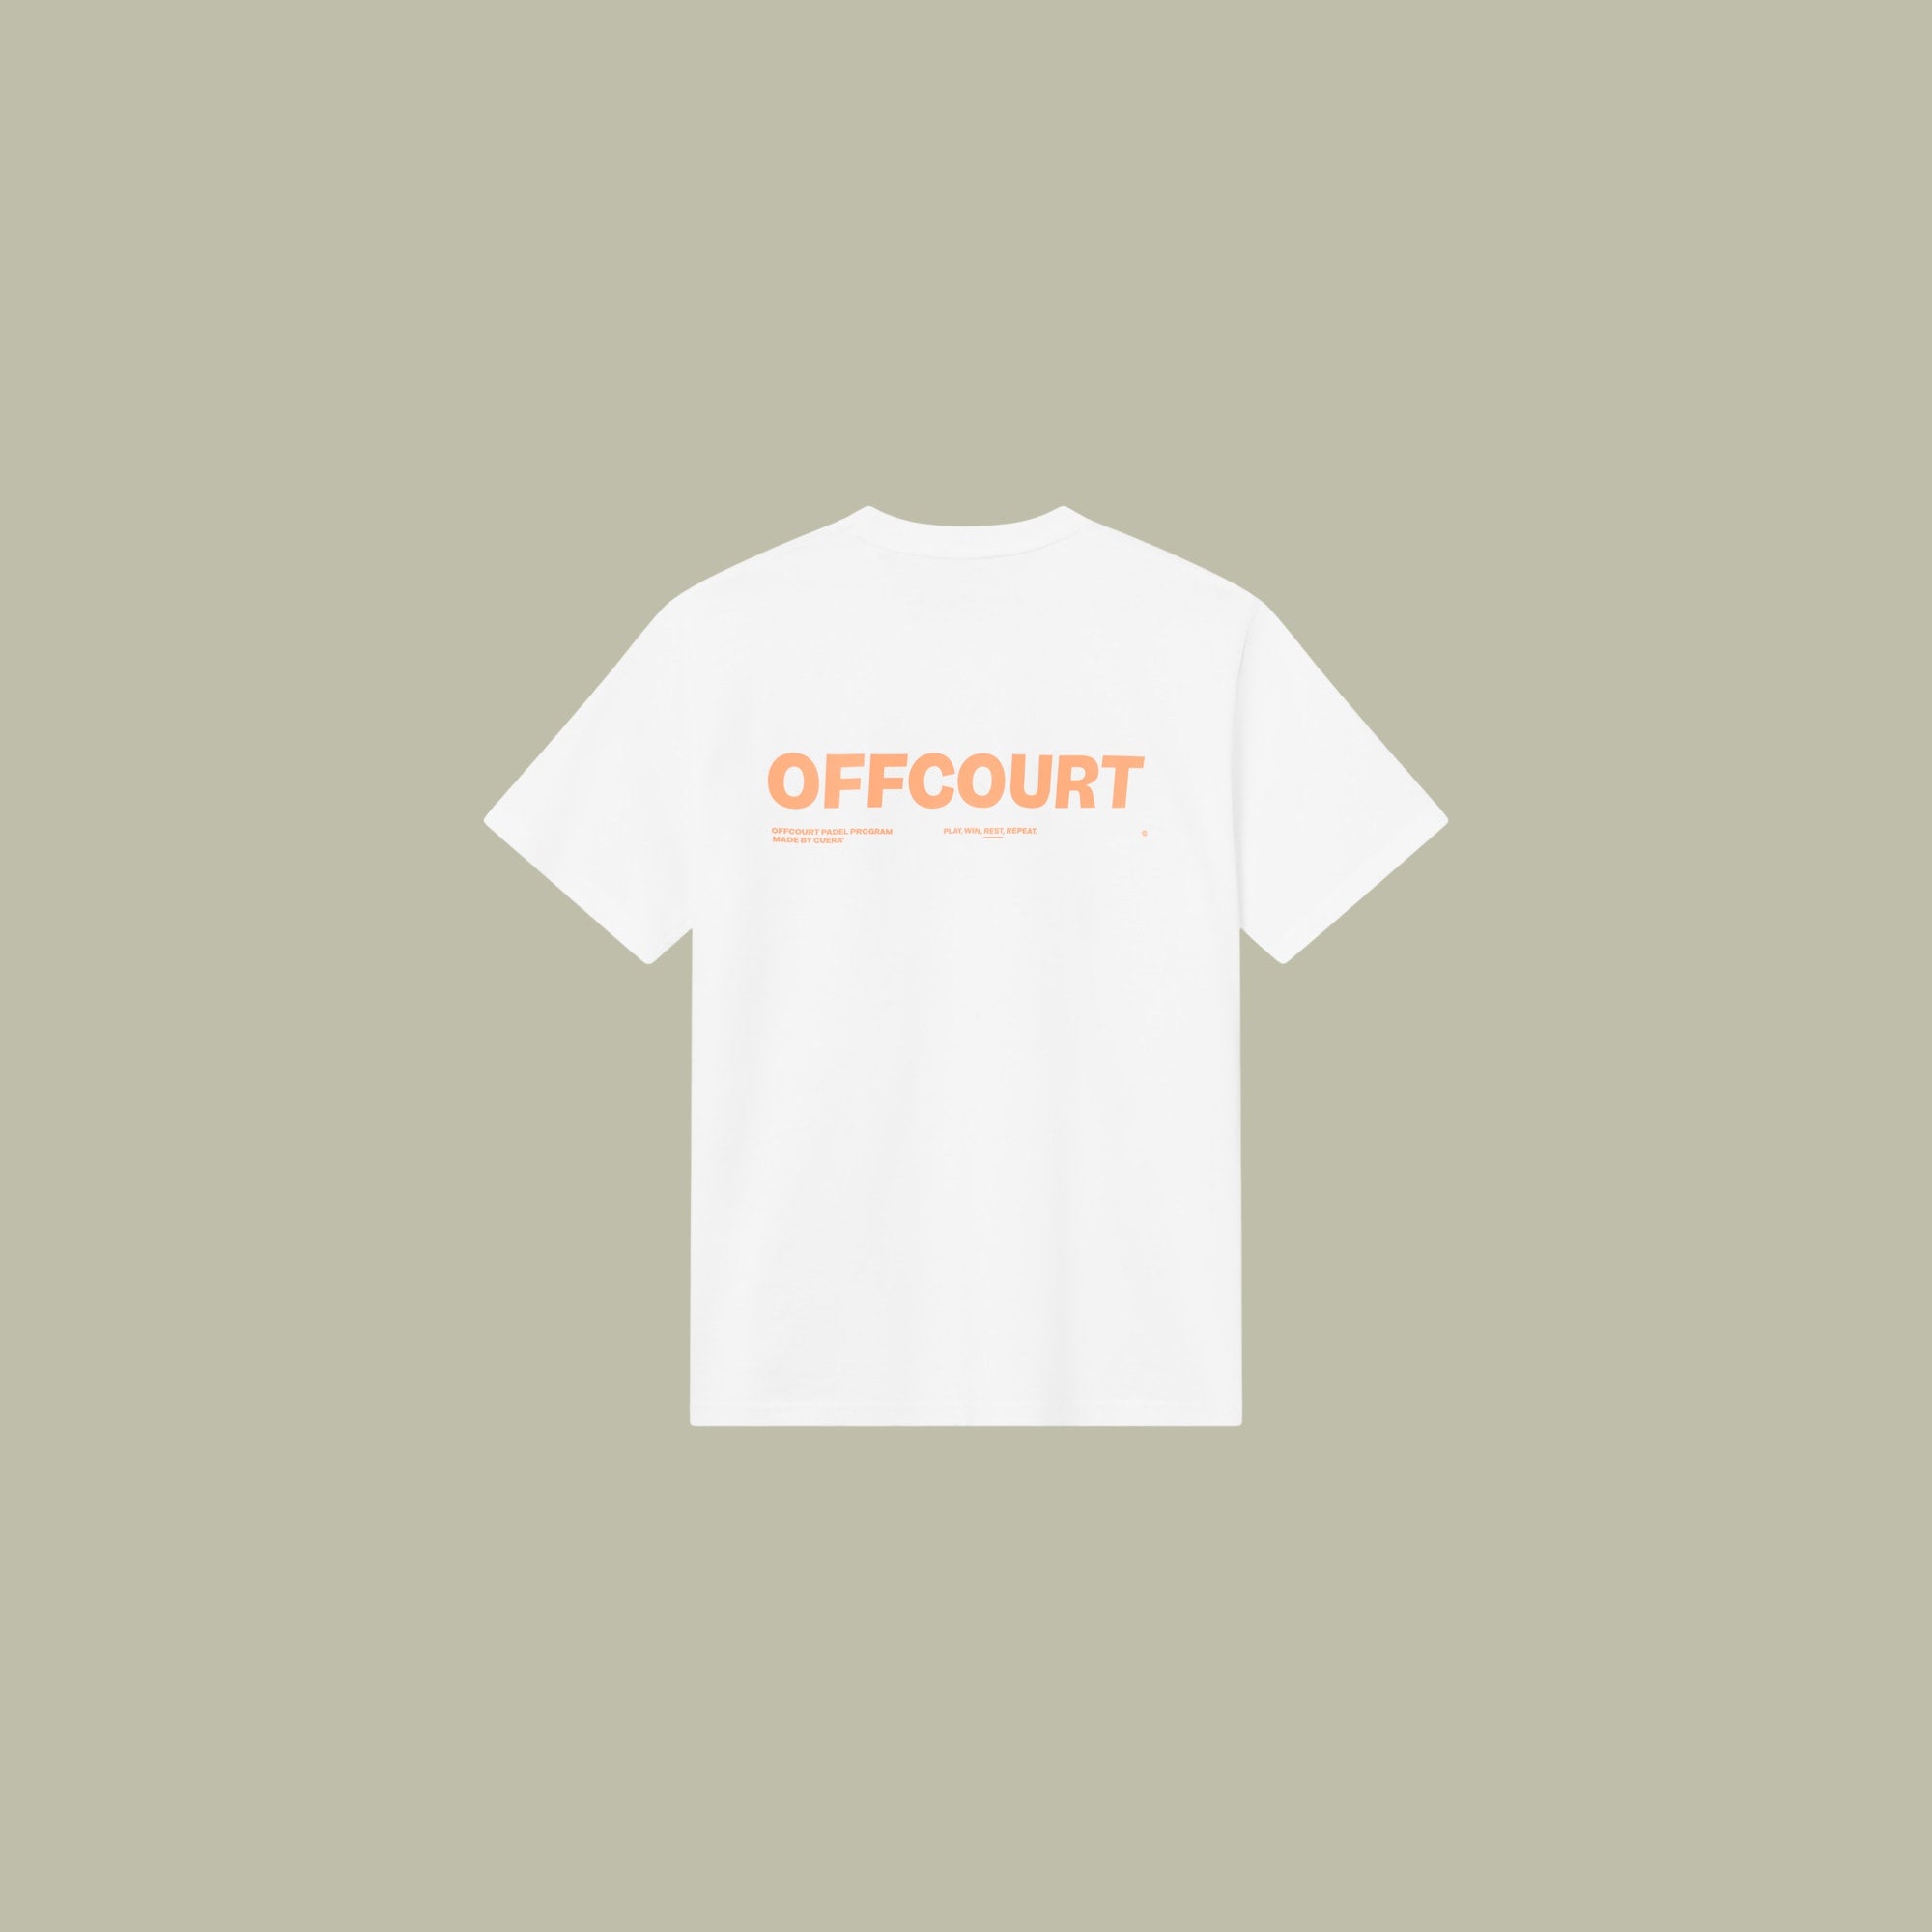 Relaxed Heavy Offcourt T-Shirt - White